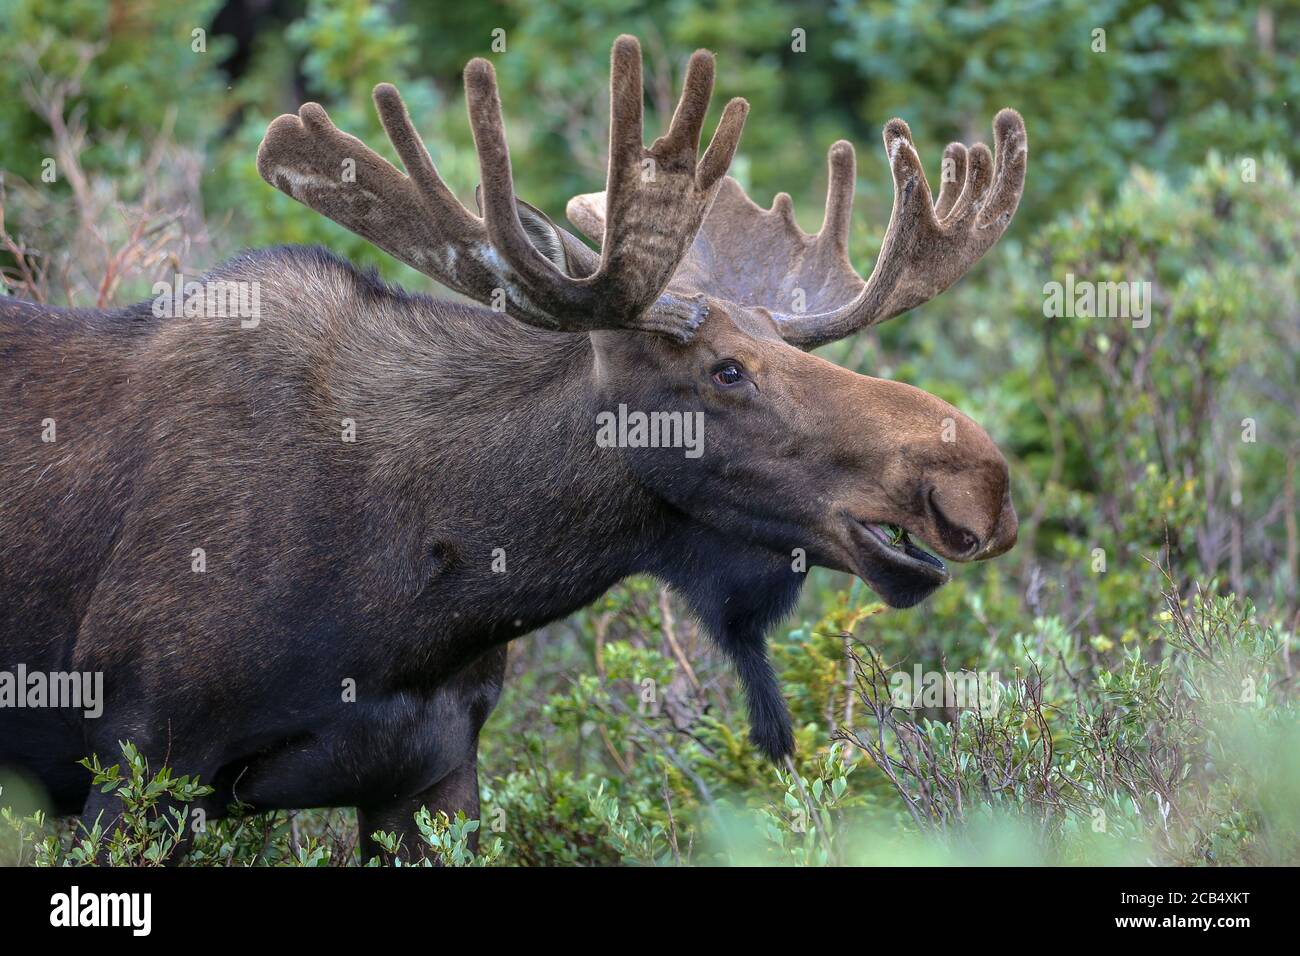 Bull moose alces alces with velvet antlers in green foliage Stock Photo